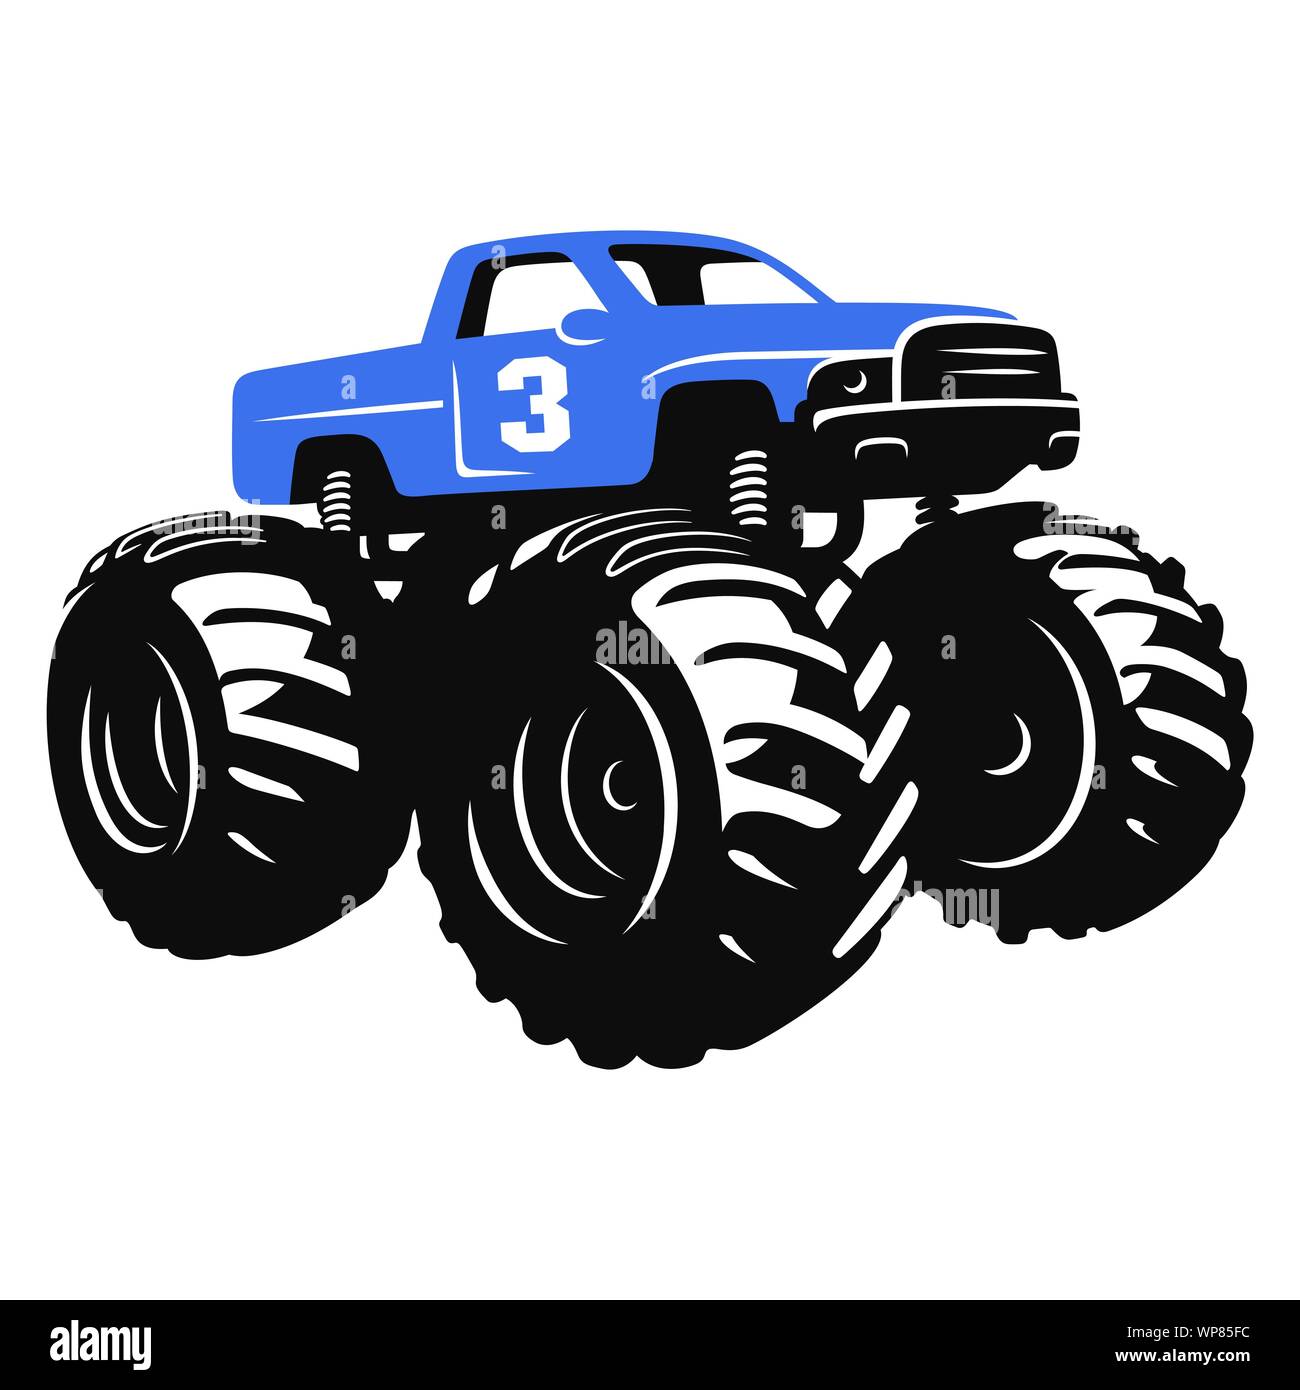 Monster Truck Red Car Cartoon Character Vector Illustration Stock  Illustration - Download Image Now - iStock